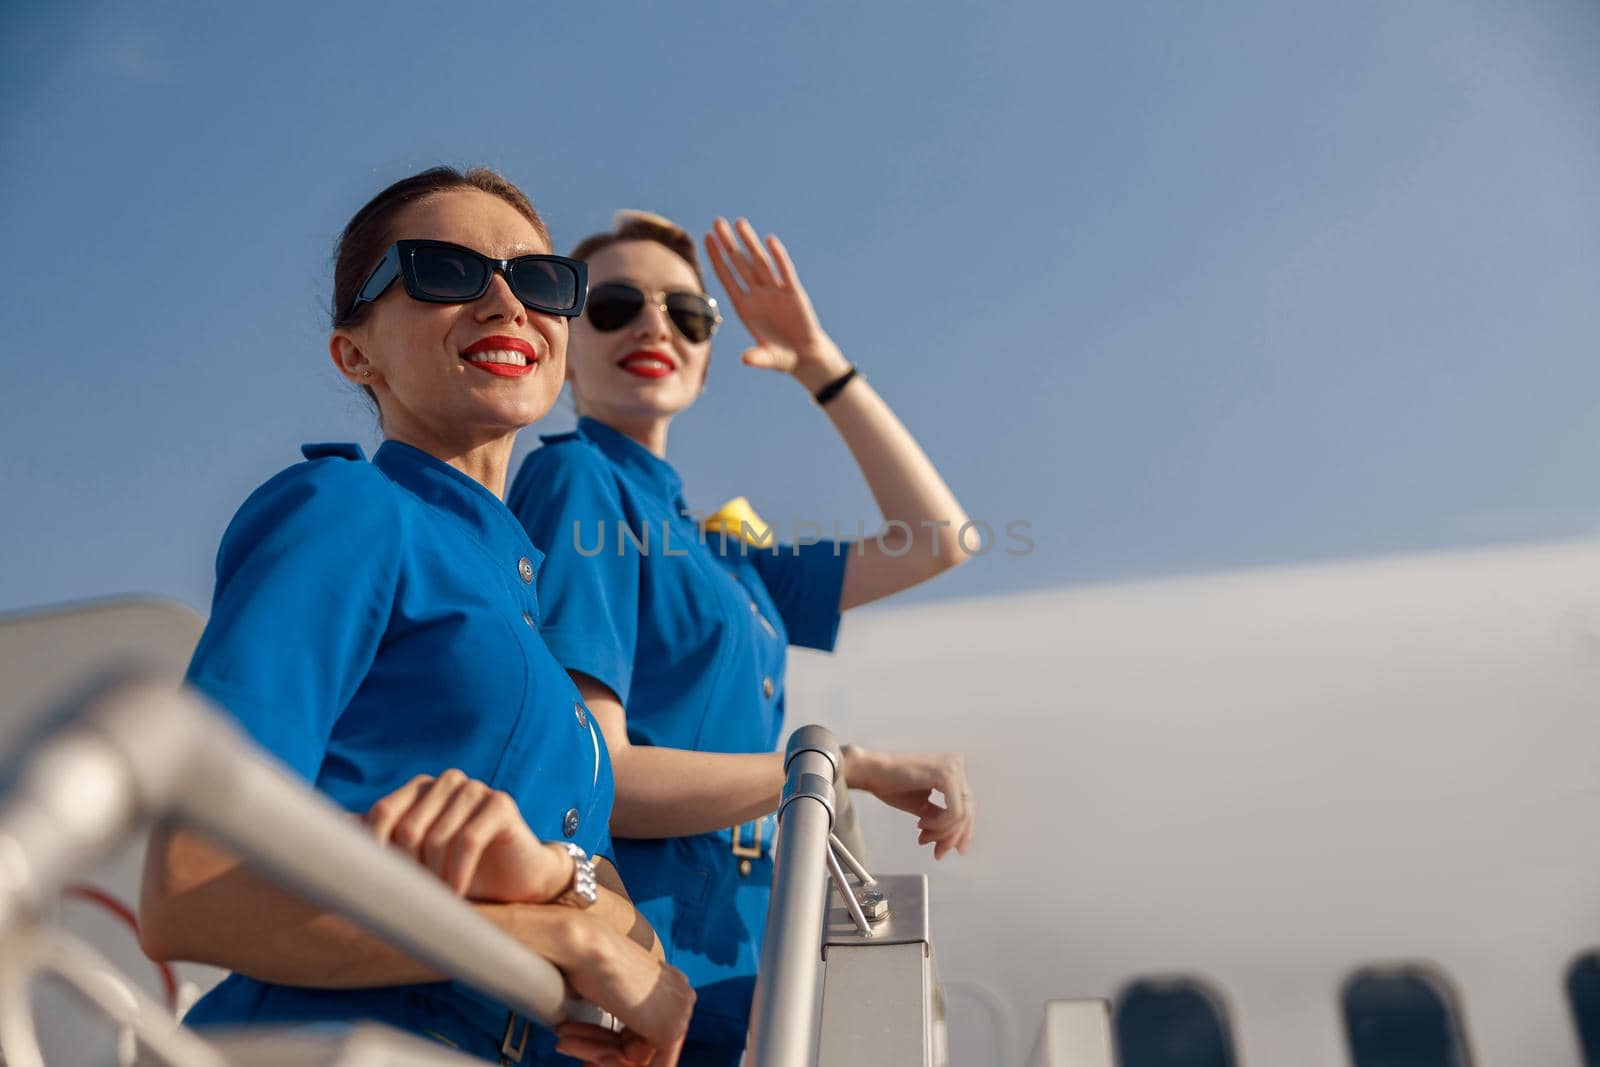 Portrait of two cheerful air stewardesses in blue uniform and sunglasses smiling away, standing together on airstair on a sunny day. Aircrew, occupation concept